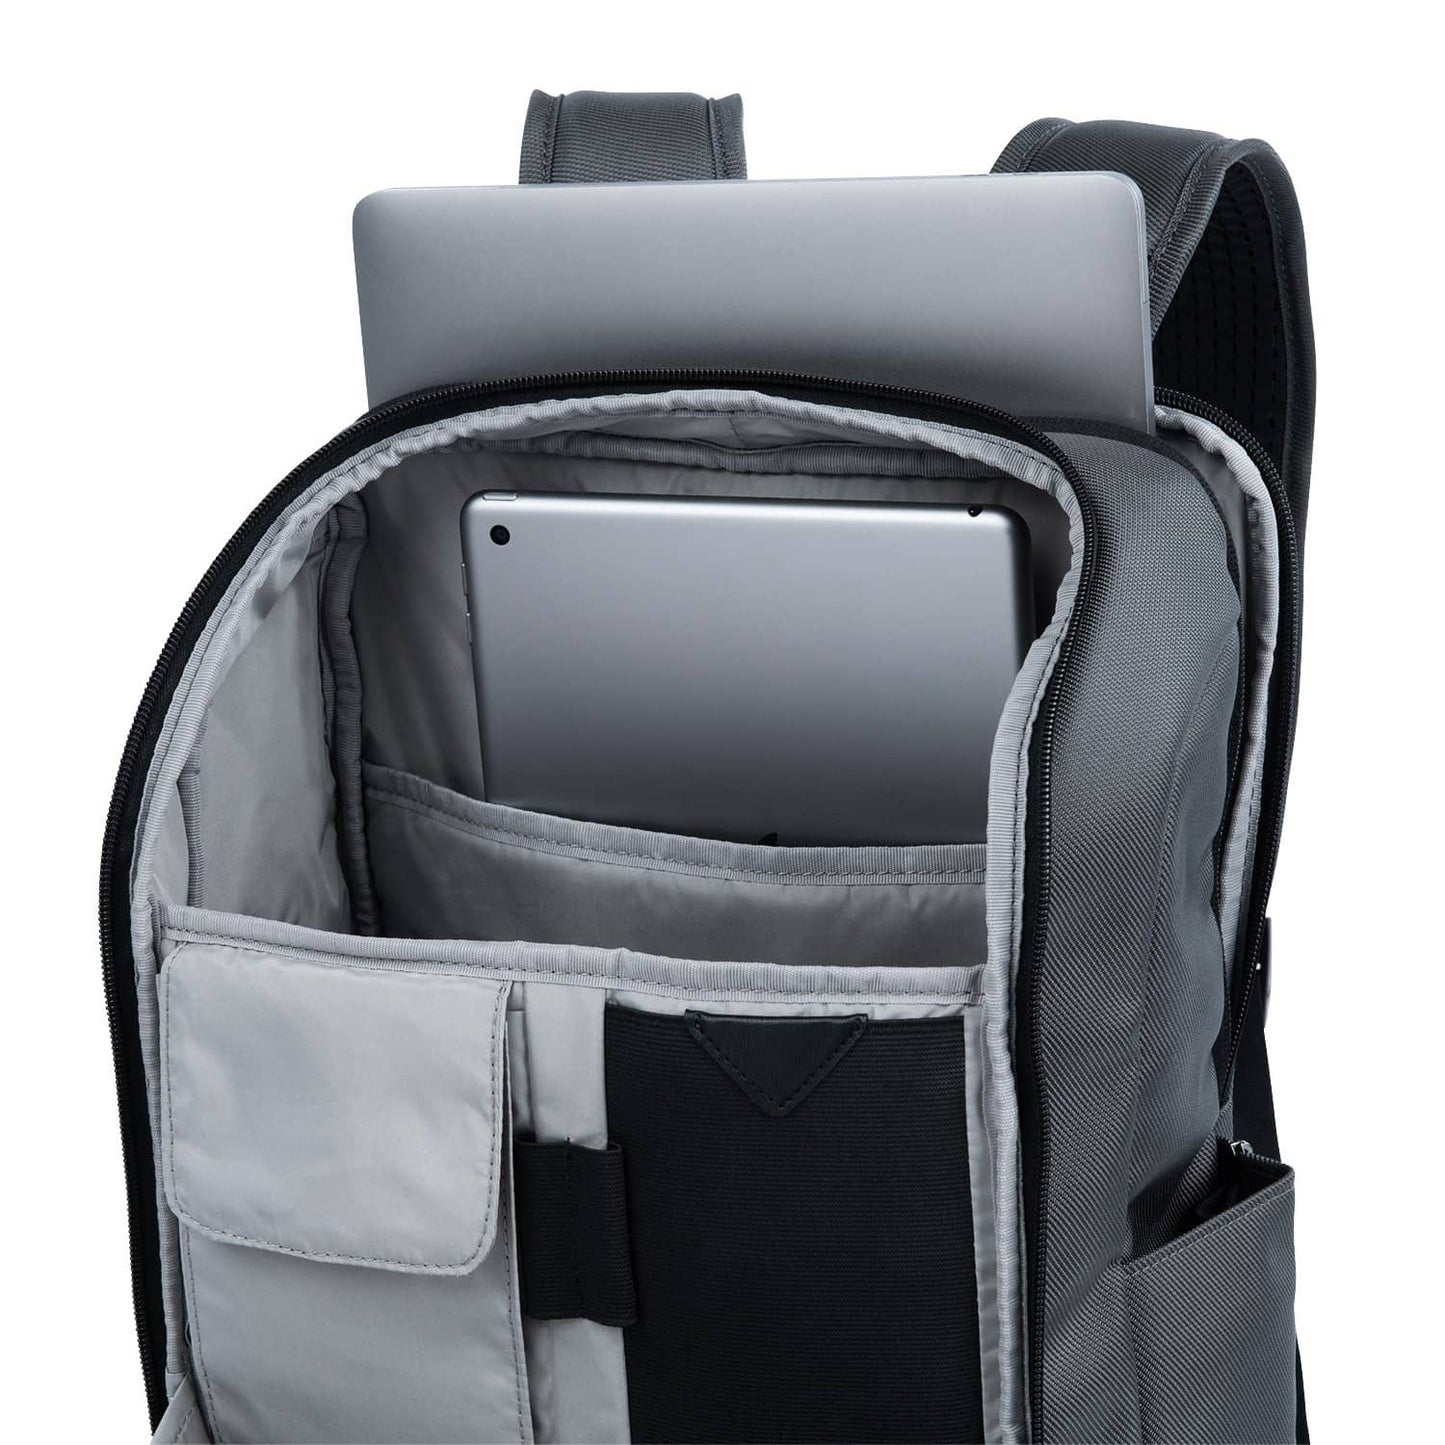 Travelpro Crew™ Executive Choice™ 3 Slim Laptop Backpack- 4052006